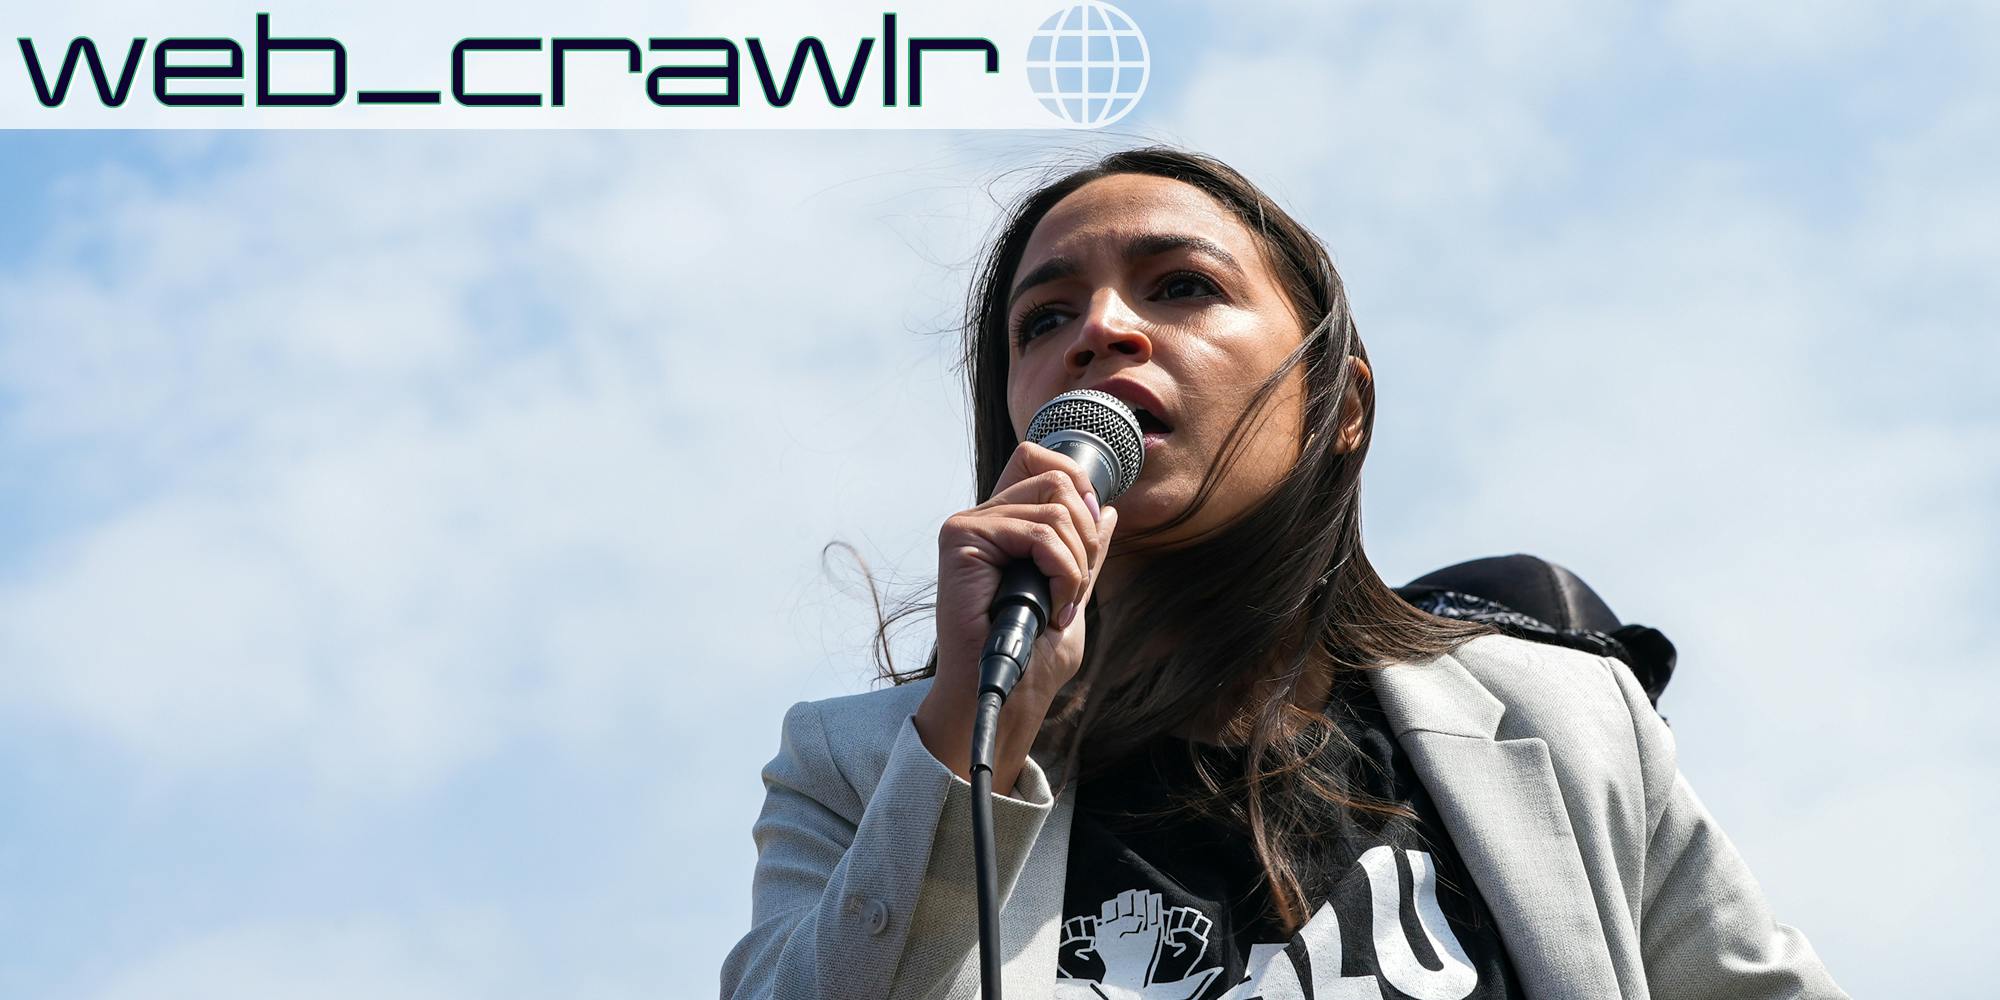 Rep. Alexandria Ocasio-Cortez speaking into a microphone. The Daily Dot newsletter web_crawlr logo is in the top left corner.